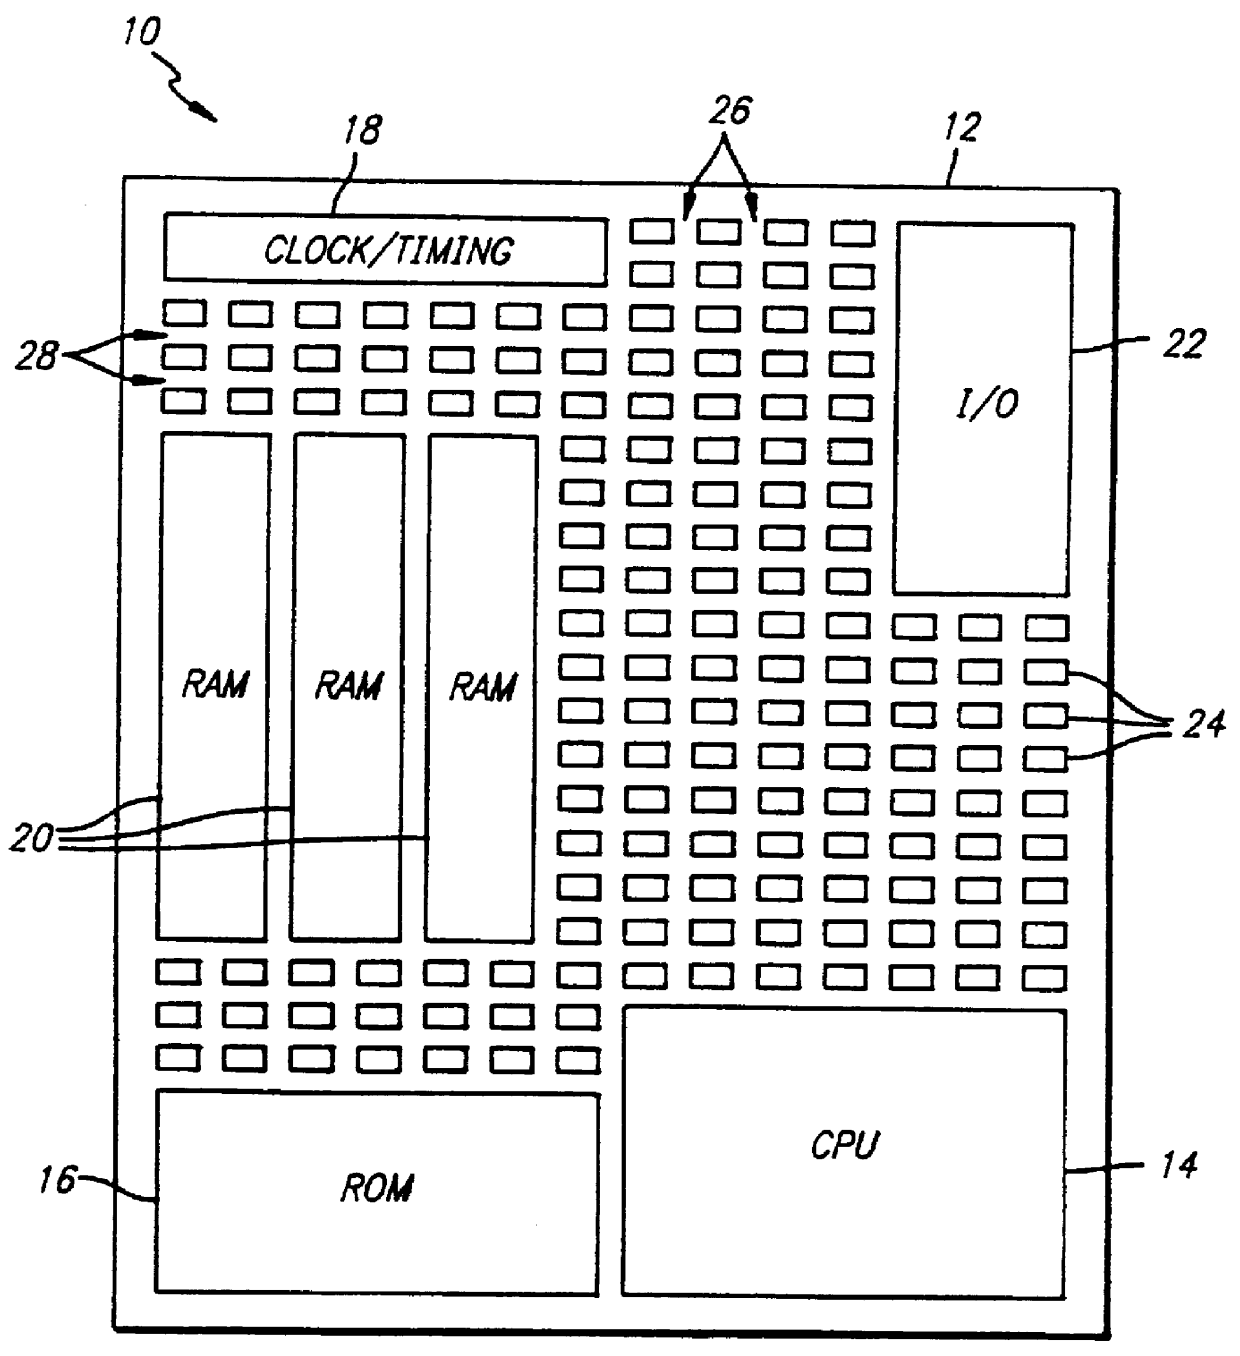 Cell placement representation and transposition for integrated circuit physical design automation system